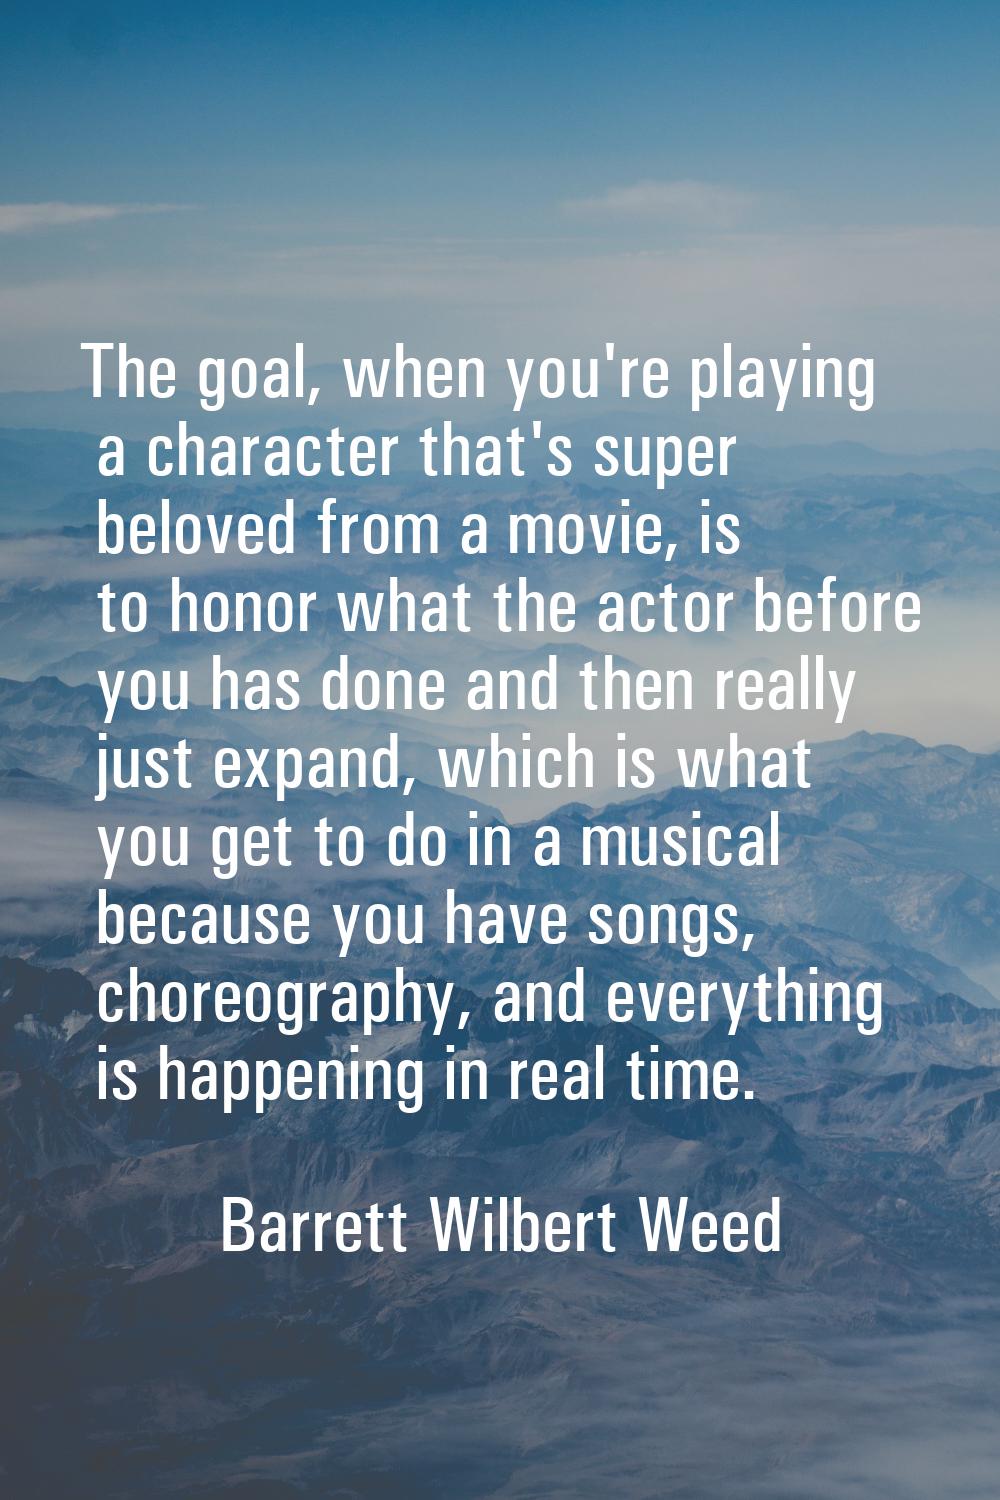 The goal, when you're playing a character that's super beloved from a movie, is to honor what the a